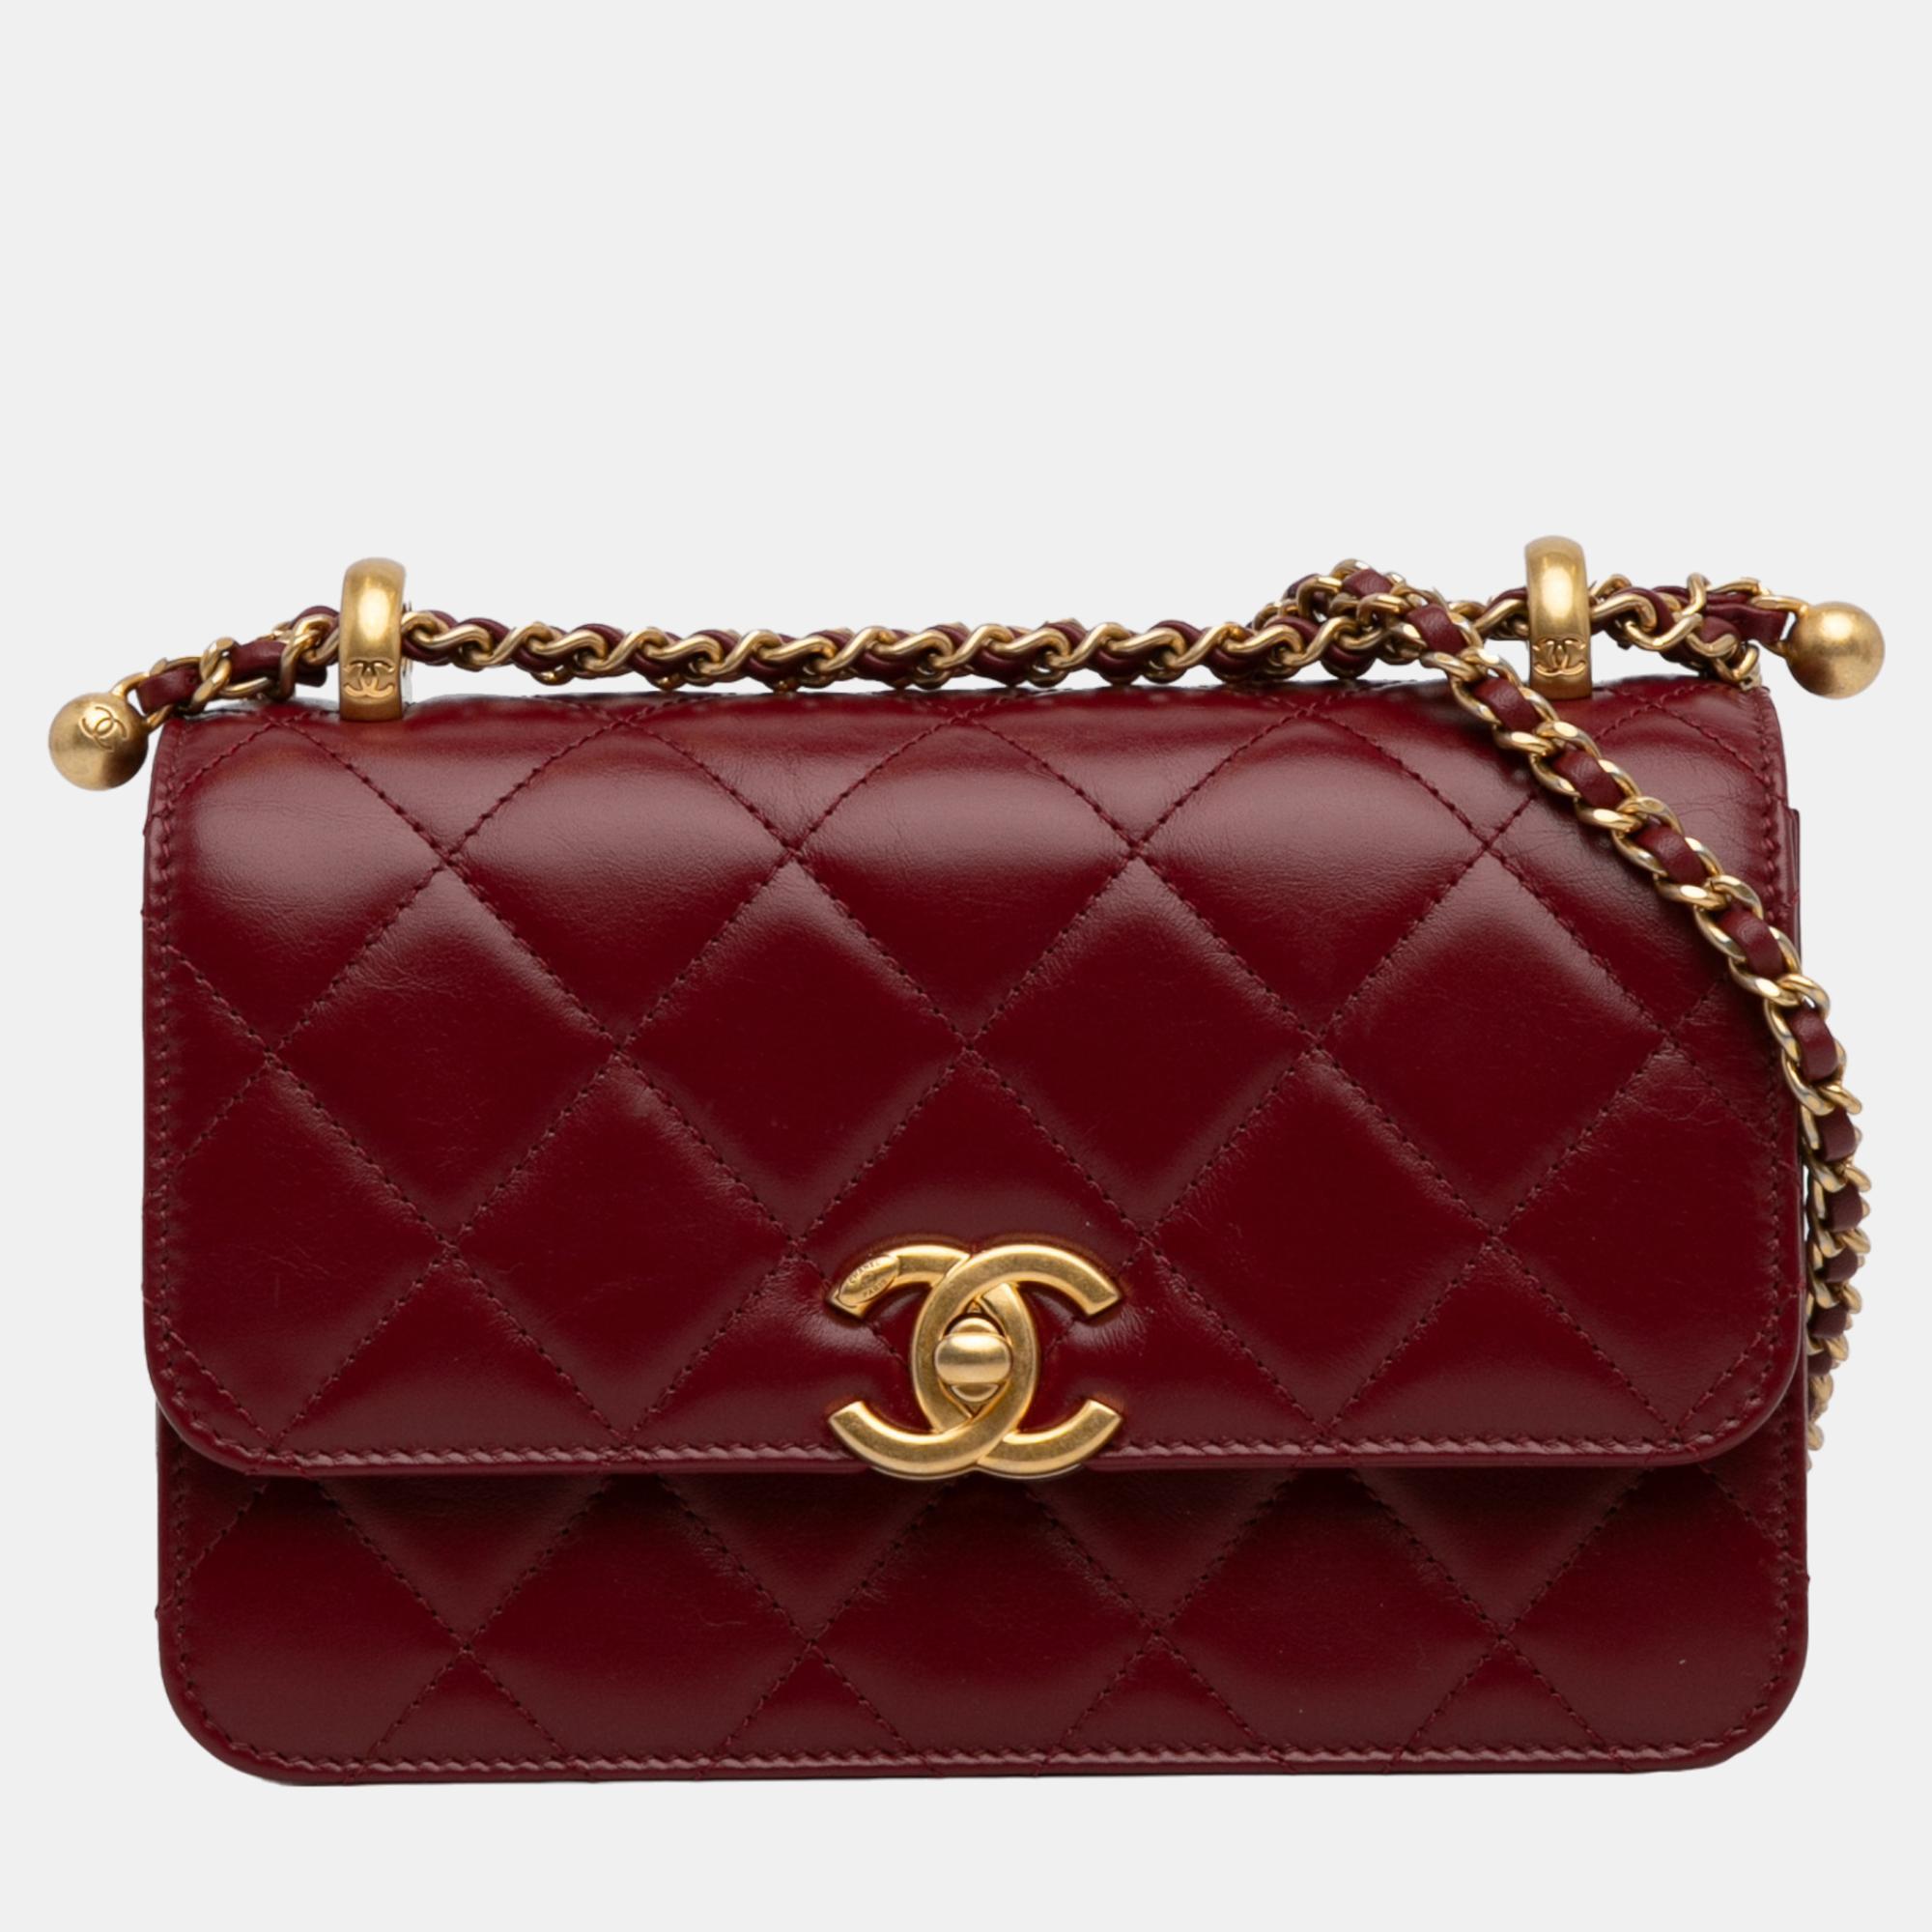 Chanel red mini perfect fit flap bag